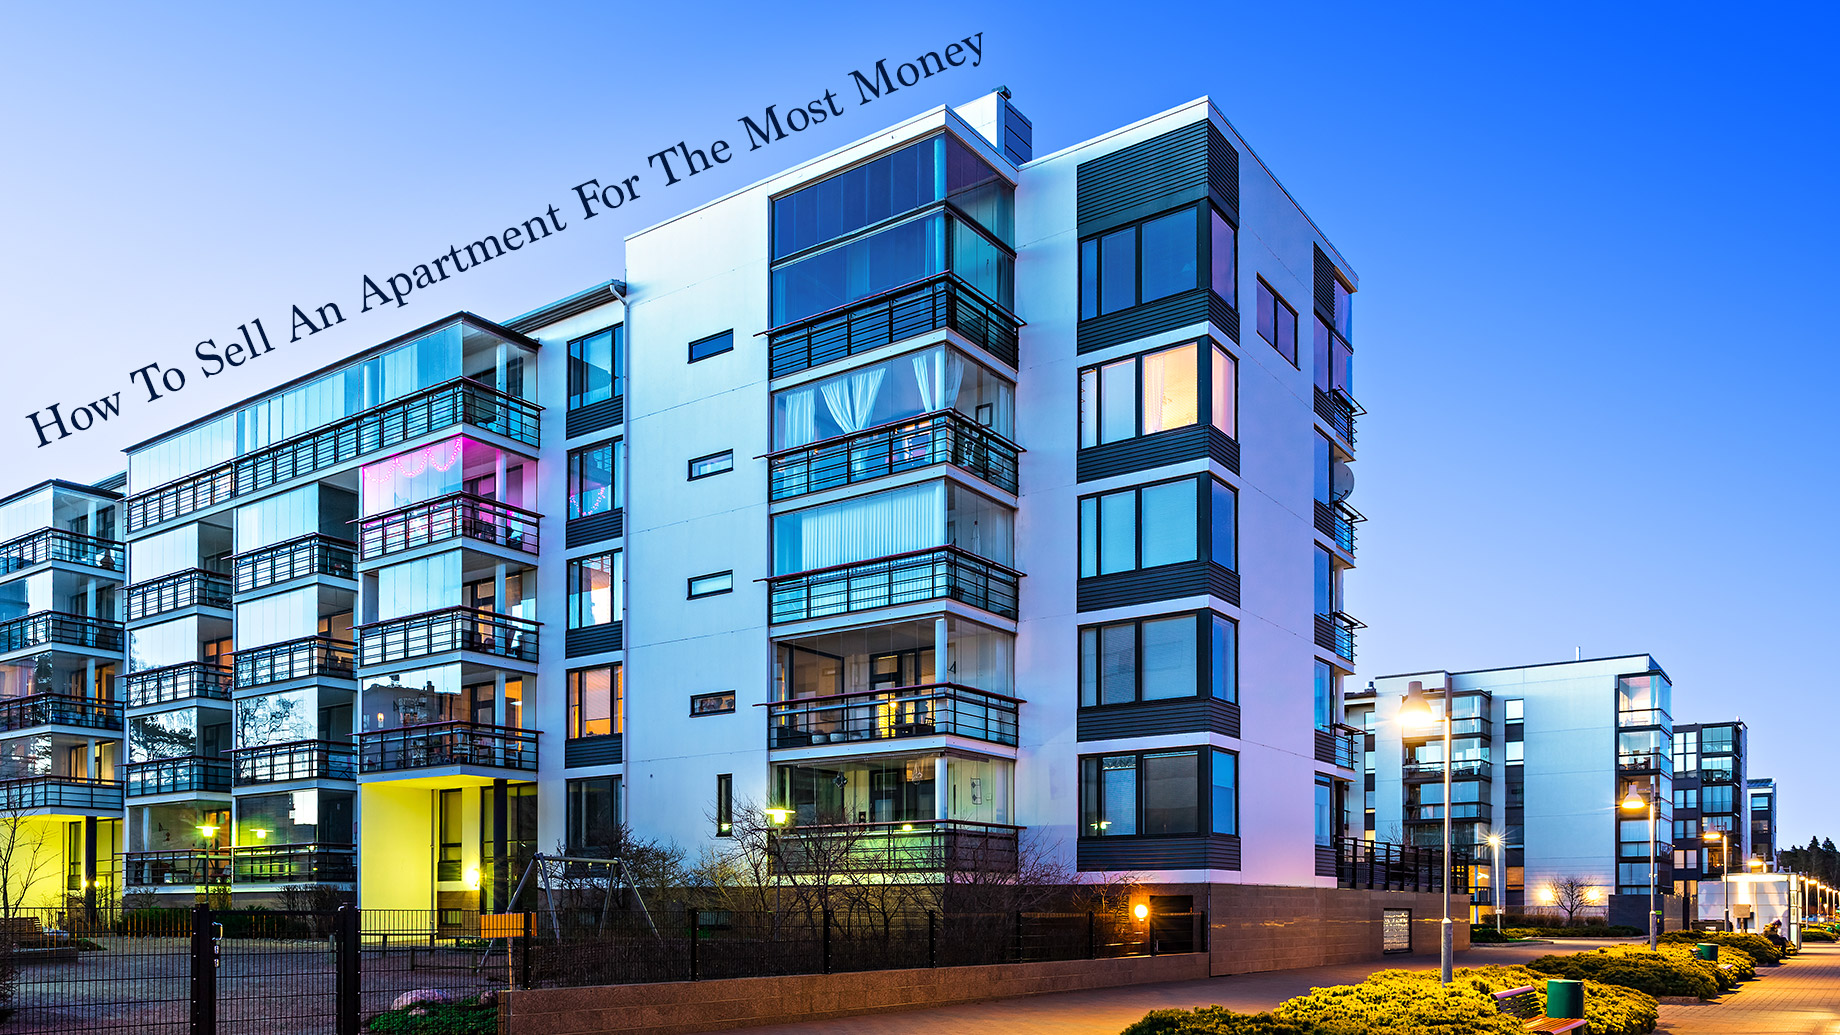 How To Sell An Apartment For The Most Money